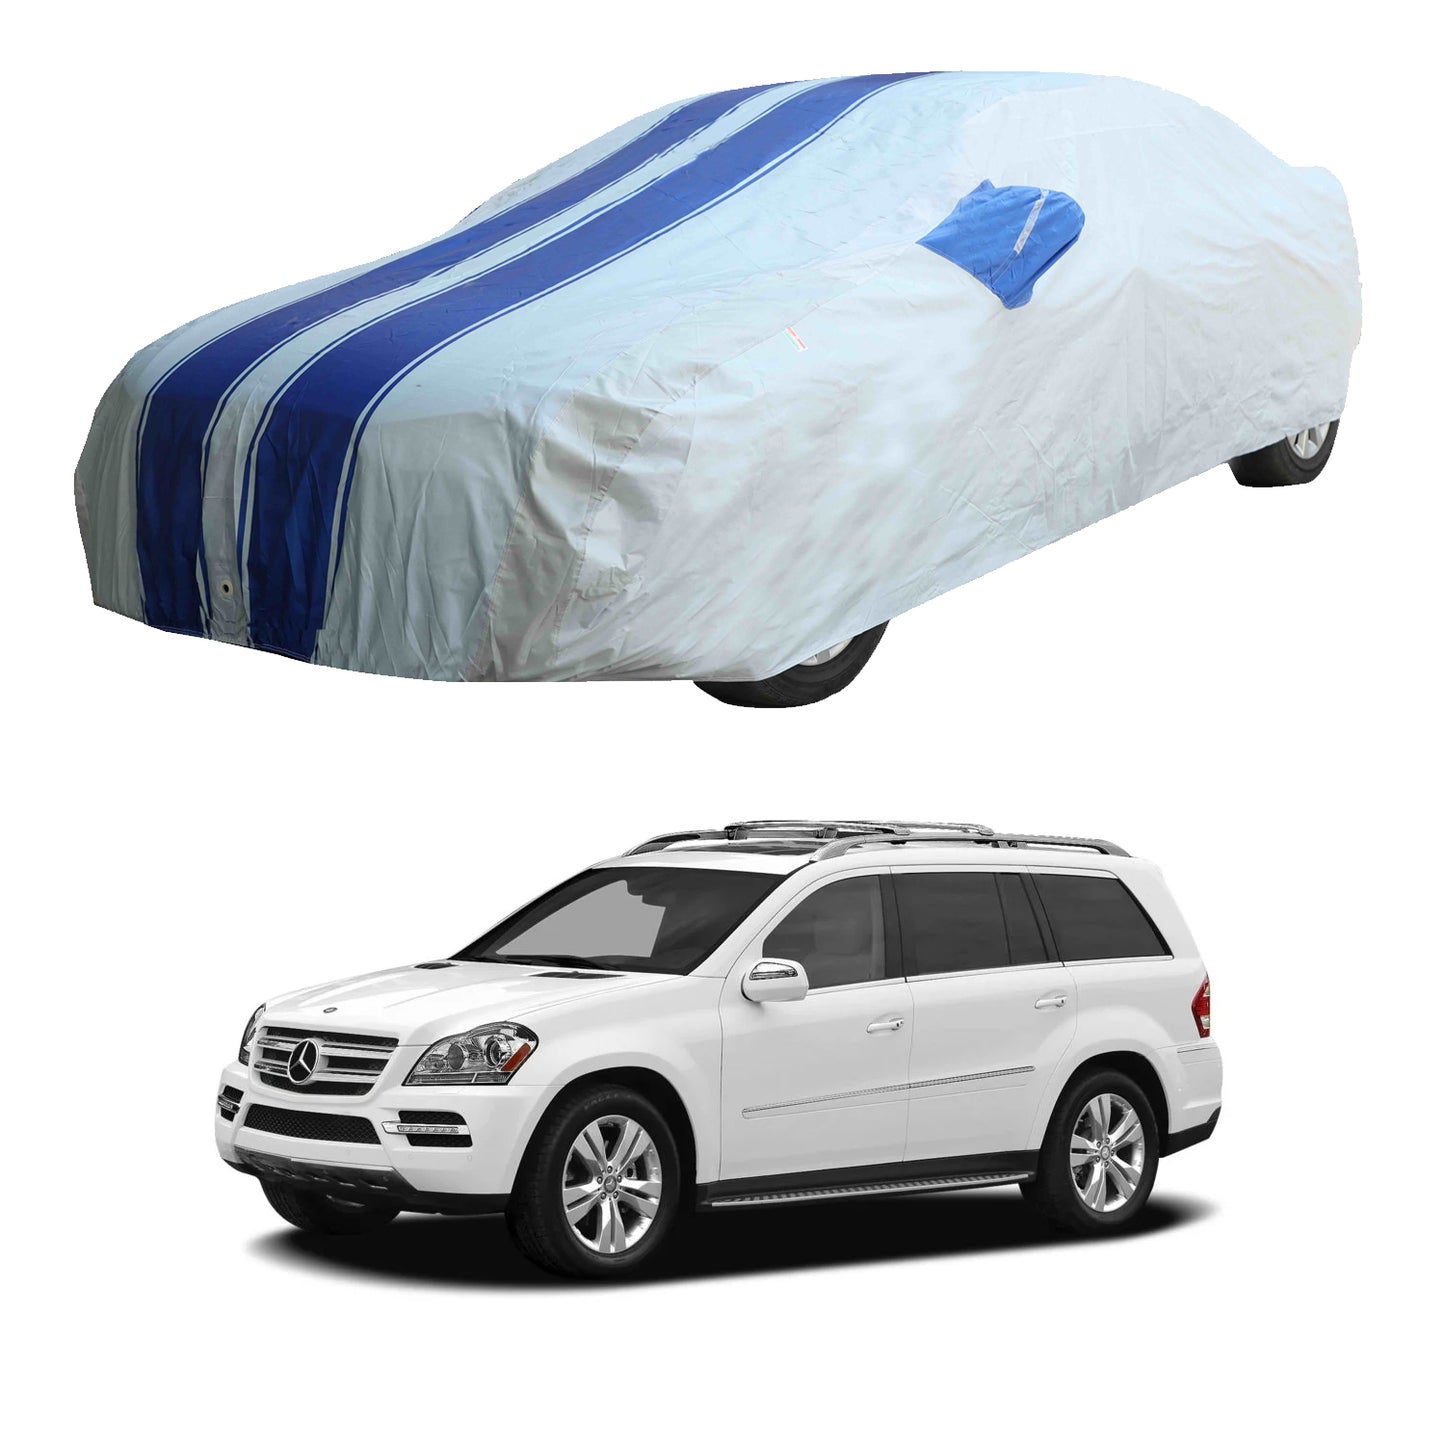 Oshotto 100% Blue dustproof and Water Resistant Car Body Cover with Mirror Pockets For Mercedes Benz GL/GLS